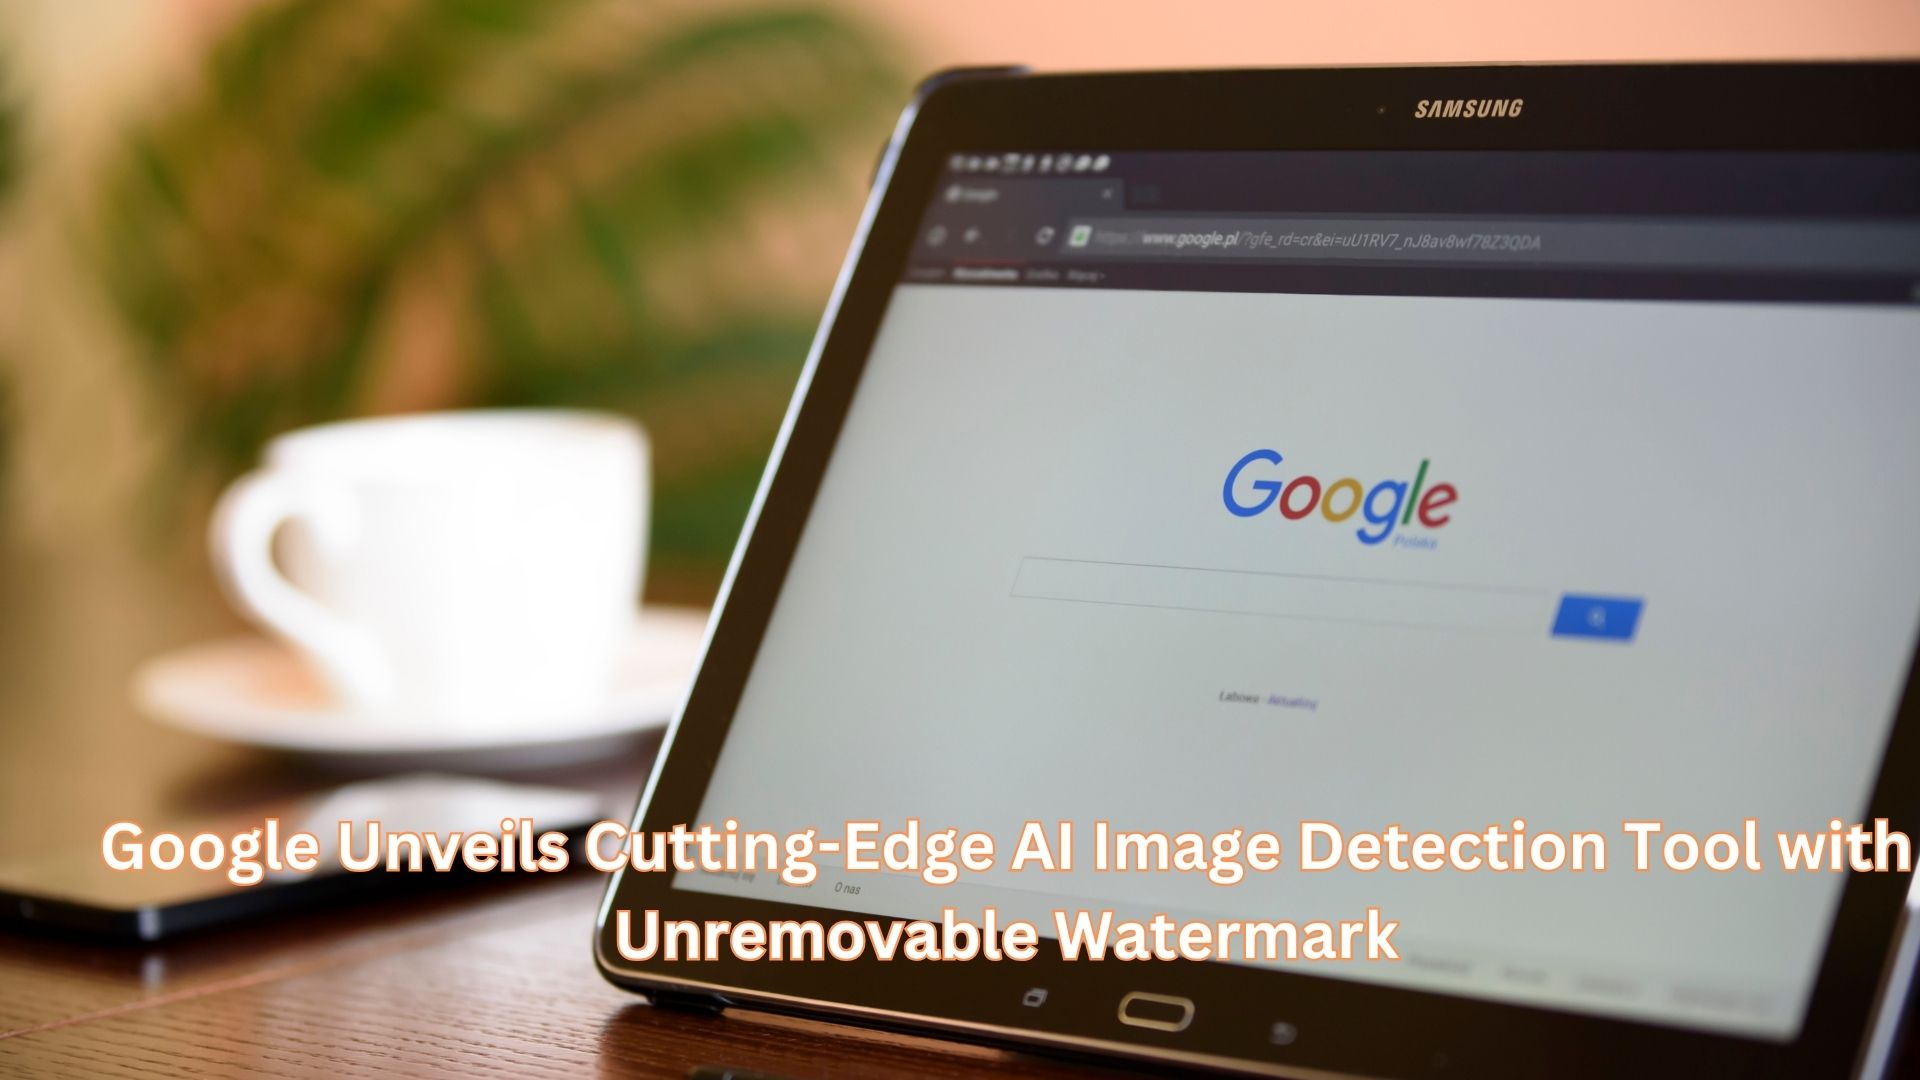 Google Unveils Cutting-Edge AI Image Detection Tool with Unremovable Watermark